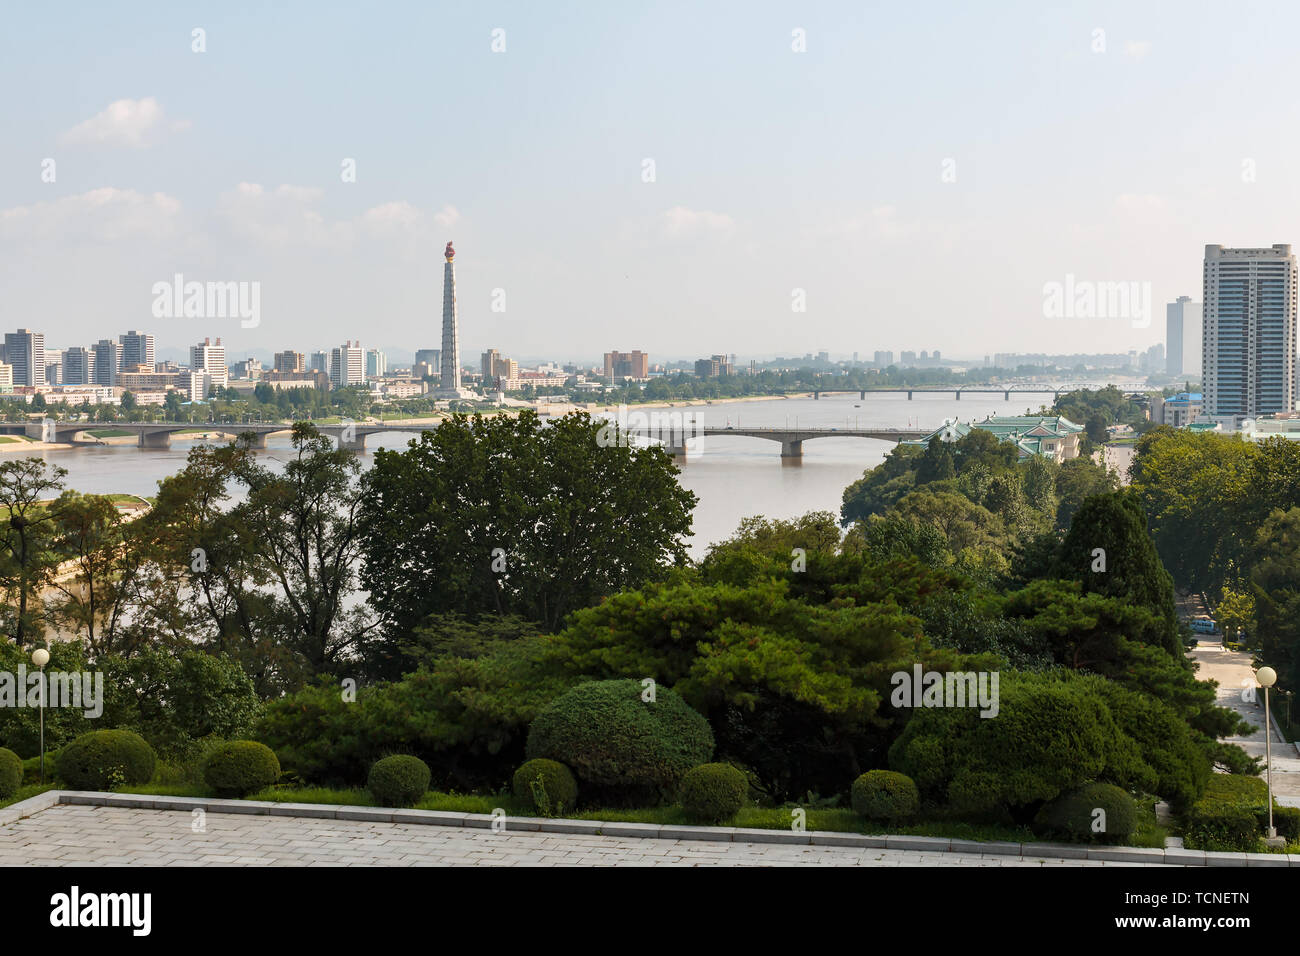 Pyongyang, North Korea - July 27, 2019: View of the Pyongyang city and the Teadong River. Tower of the Juche Ideology in the Pyongyang. Stock Photo